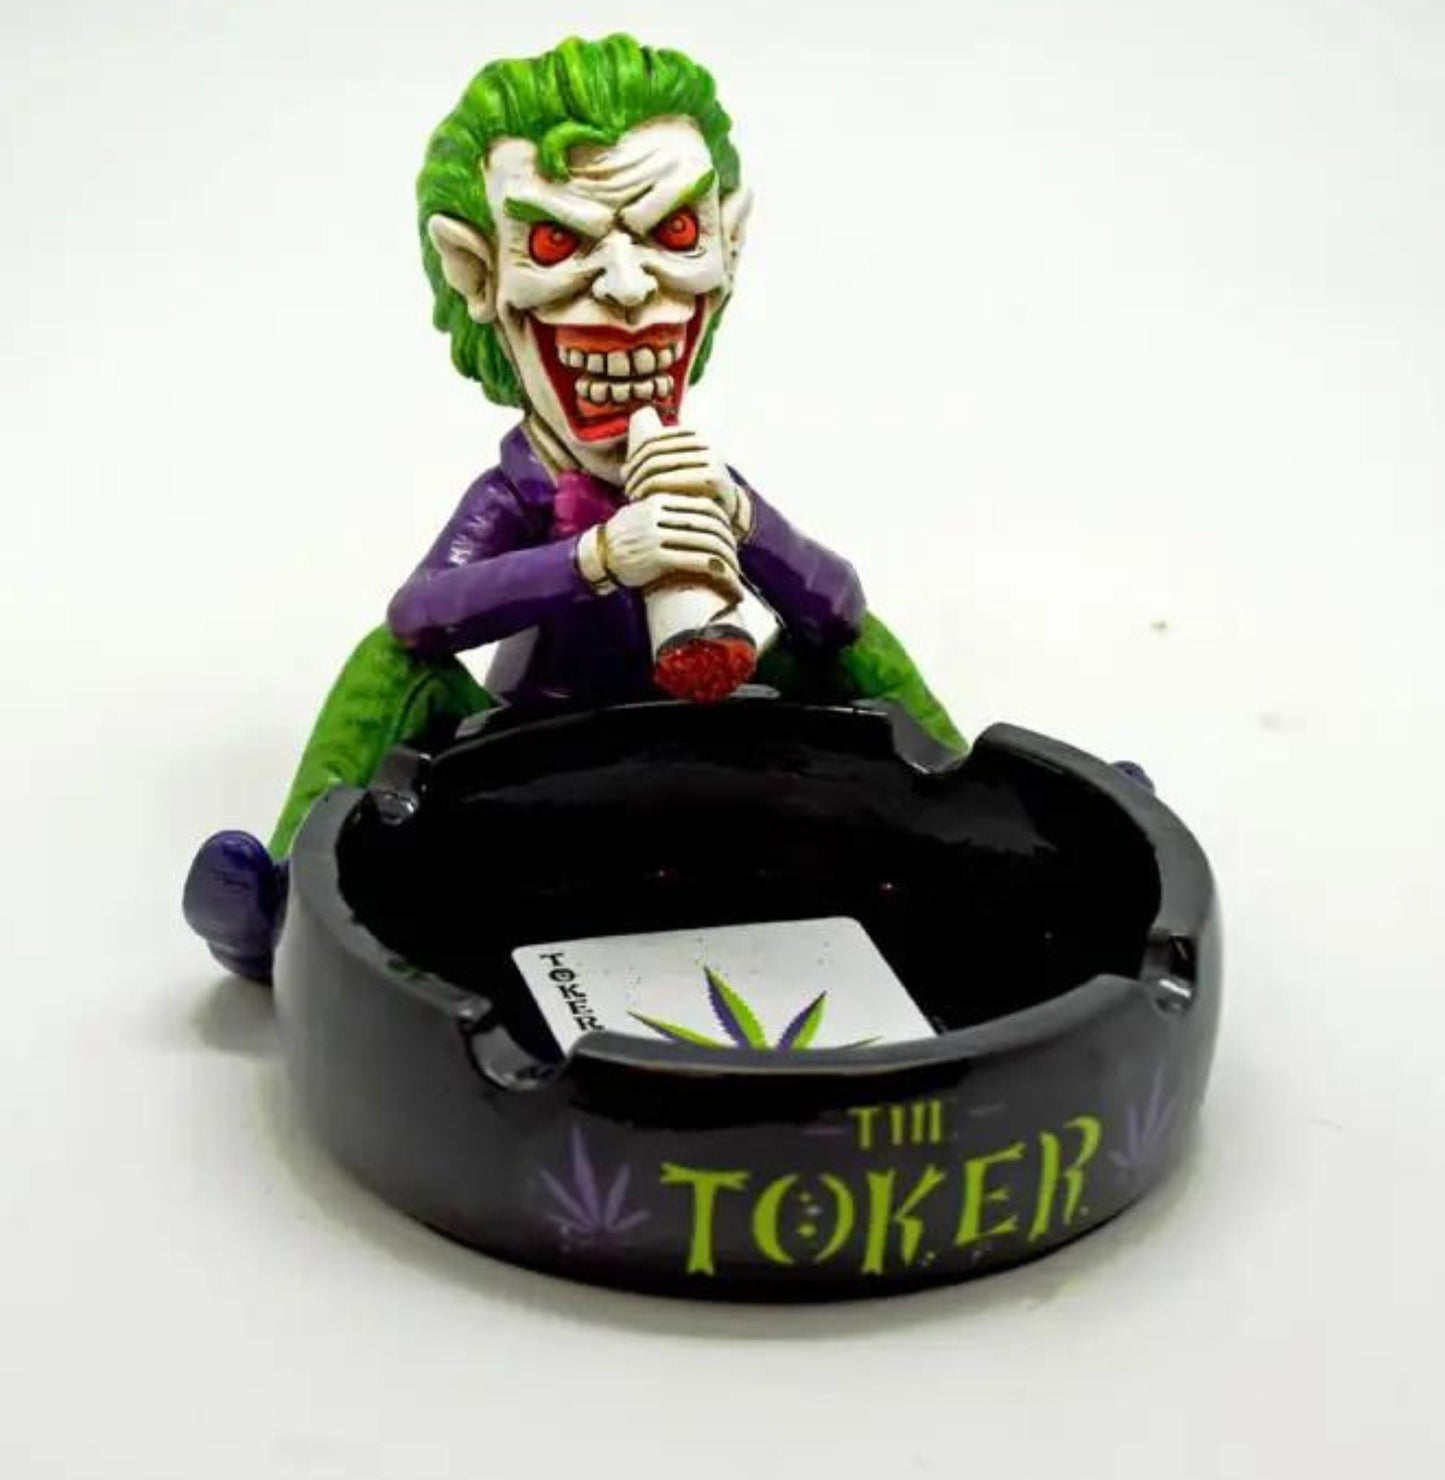 An Ashtray with the words &quot;The Toker&quot; in the front, a joker is smoking a Joint while sitting on the edge of the ashtray